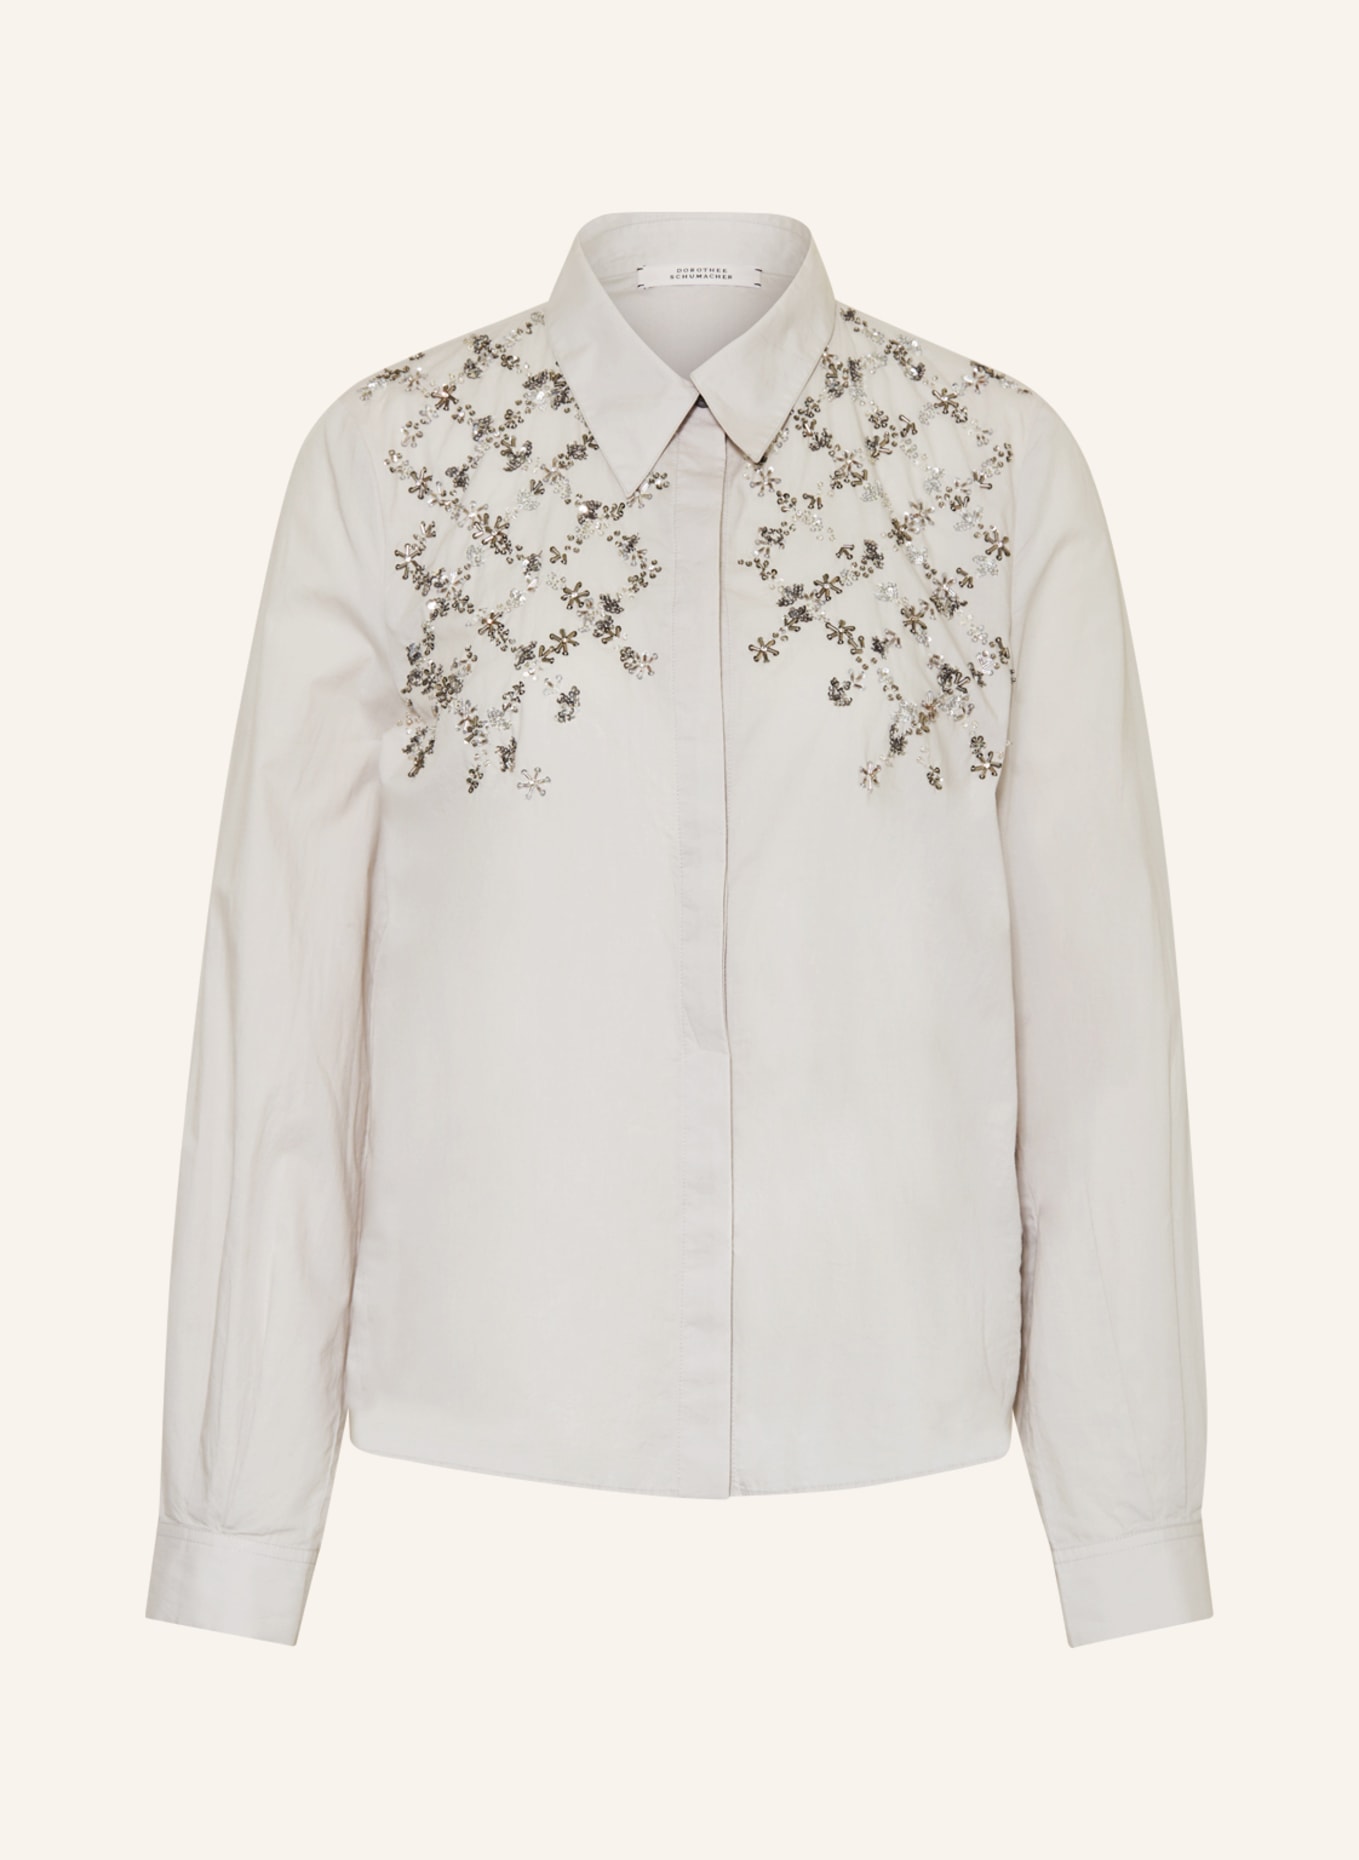 DOROTHEE SCHUMACHER Shirt blouse with decorative gems, Color: LIGHT GRAY (Image 1)